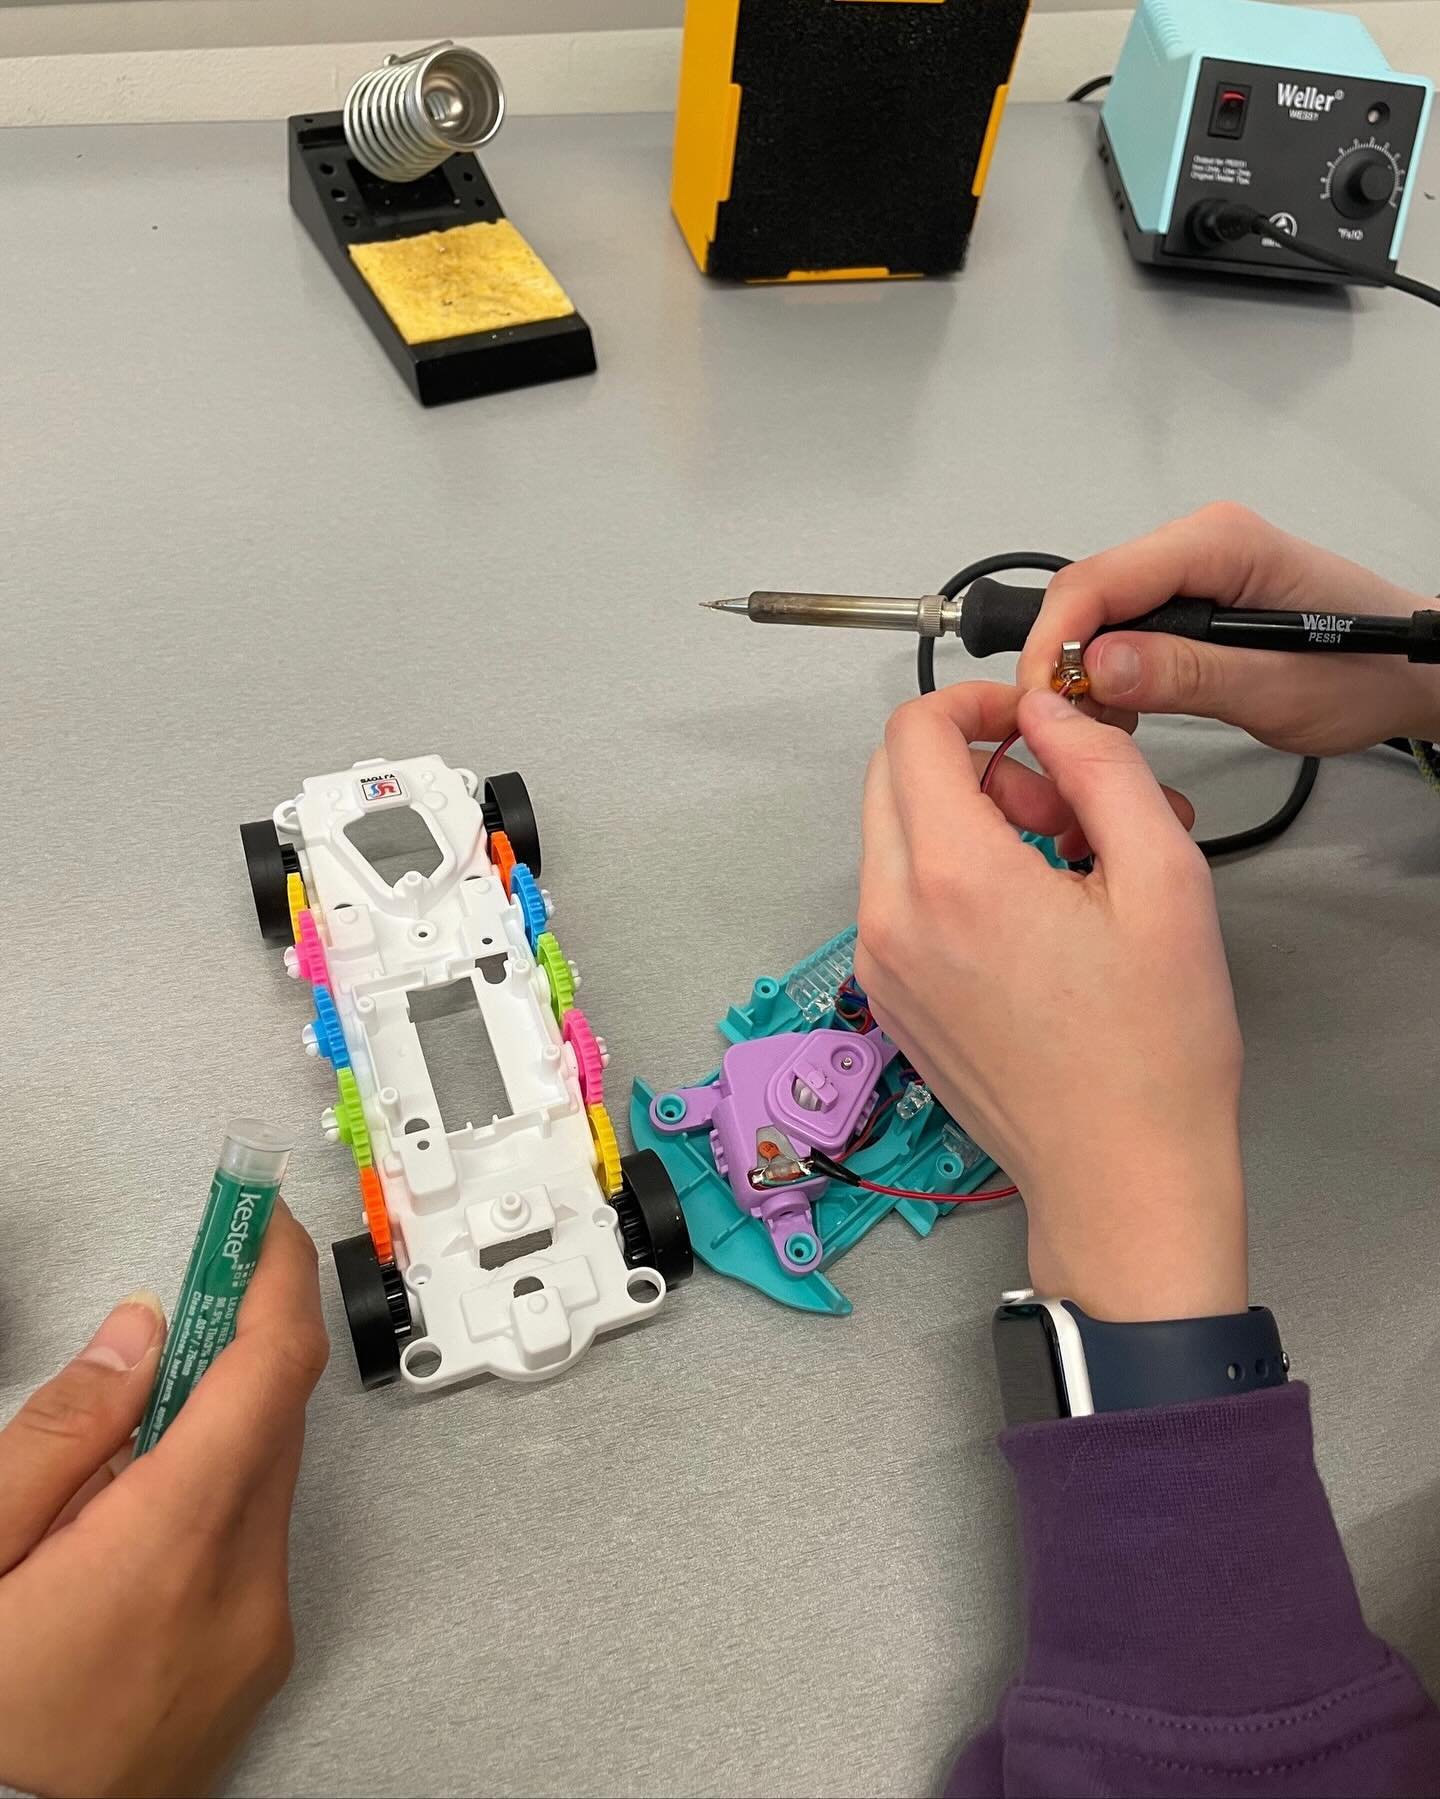 Last week we held our first toy adaptation of Spring Quarter! Our 15 attendees adapted lots of toys that were freshly introduced to our workshops including various transparent gear vehicles and a puppy bubble machine. Thank you to everyone who attend